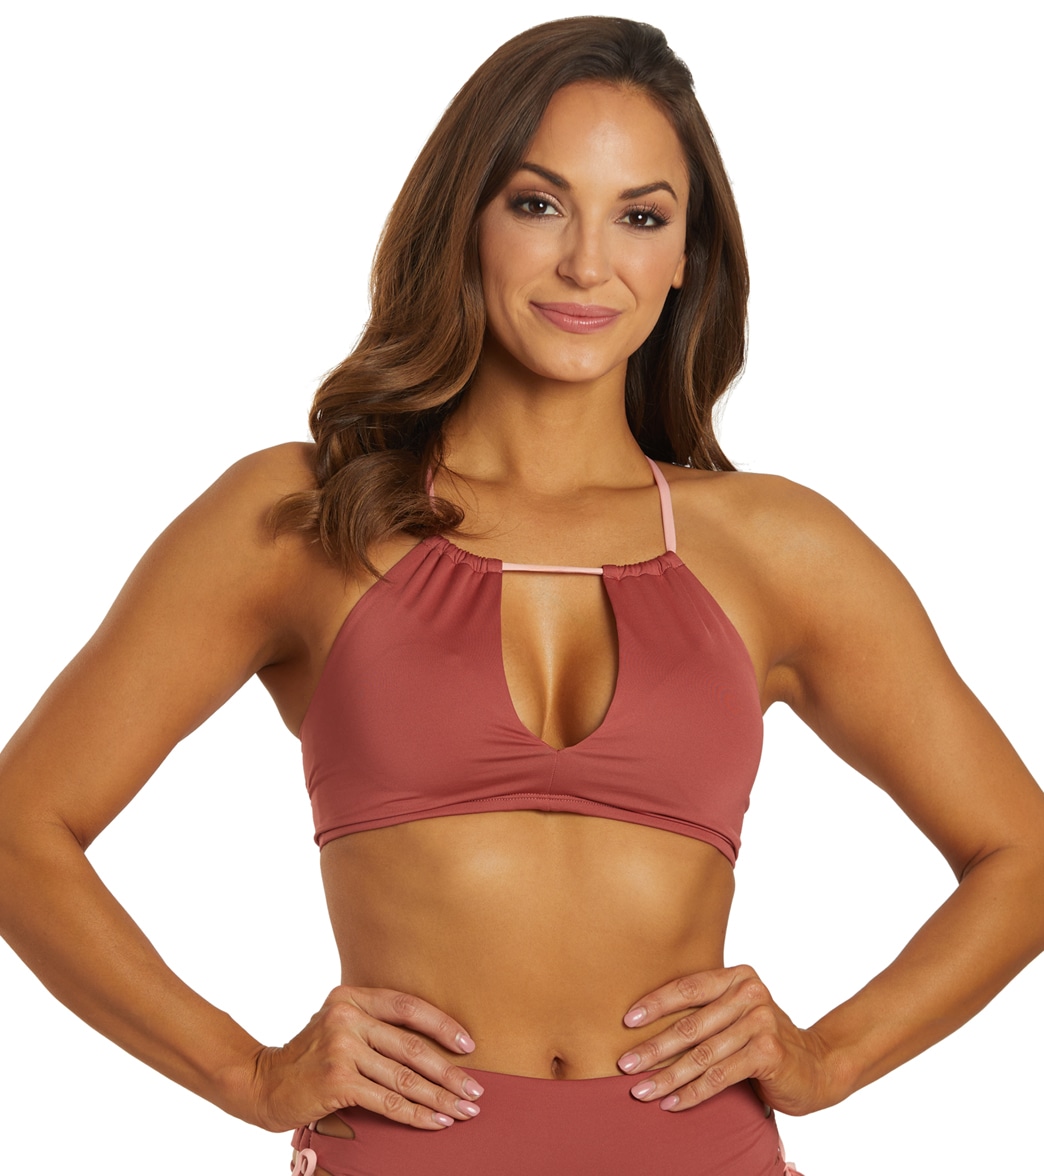 Nike Women's Solid Lace-Up High Neck Bikini Top - Canyon Rust Large - Swimoutlet.com